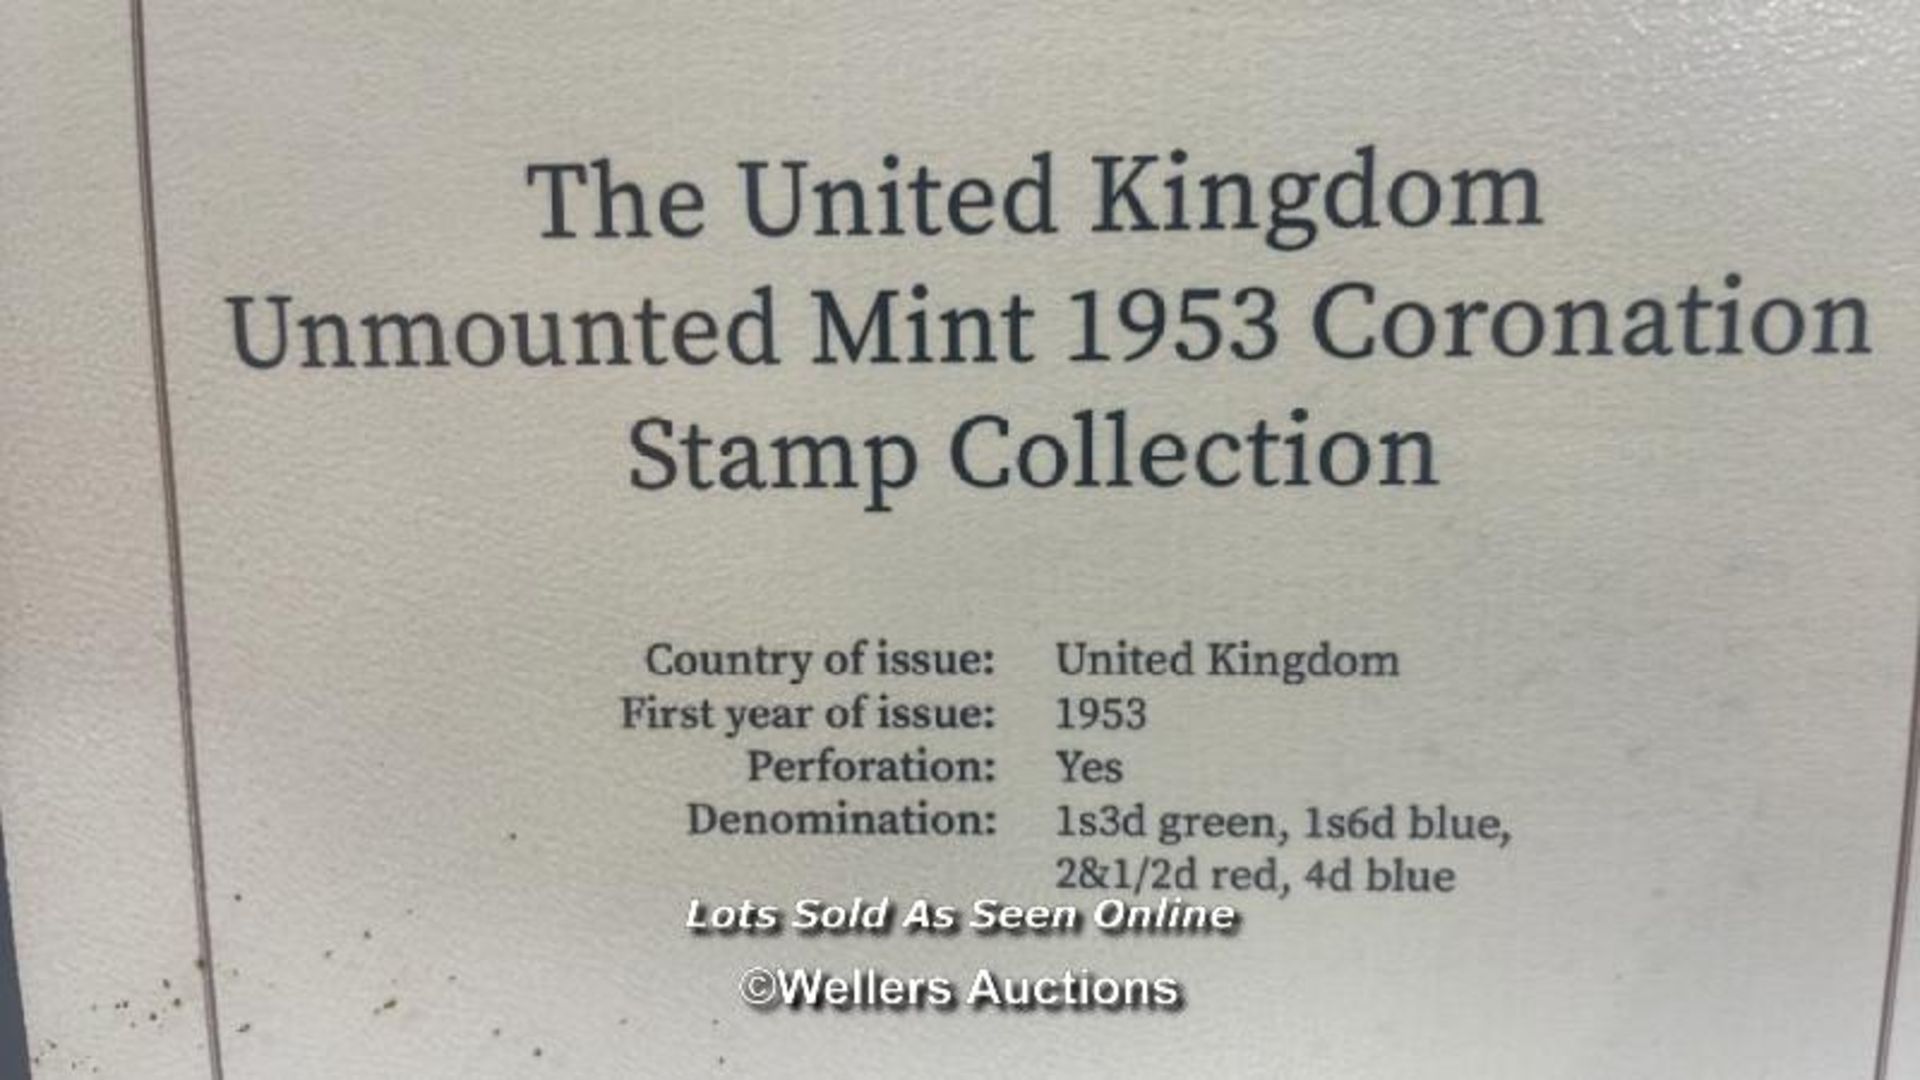 HARRINTON & BYRNE THE UNITED KINGDOM UNMOUNTED MINT 1953 CORONATION STAMP COLLECTION - Image 3 of 4